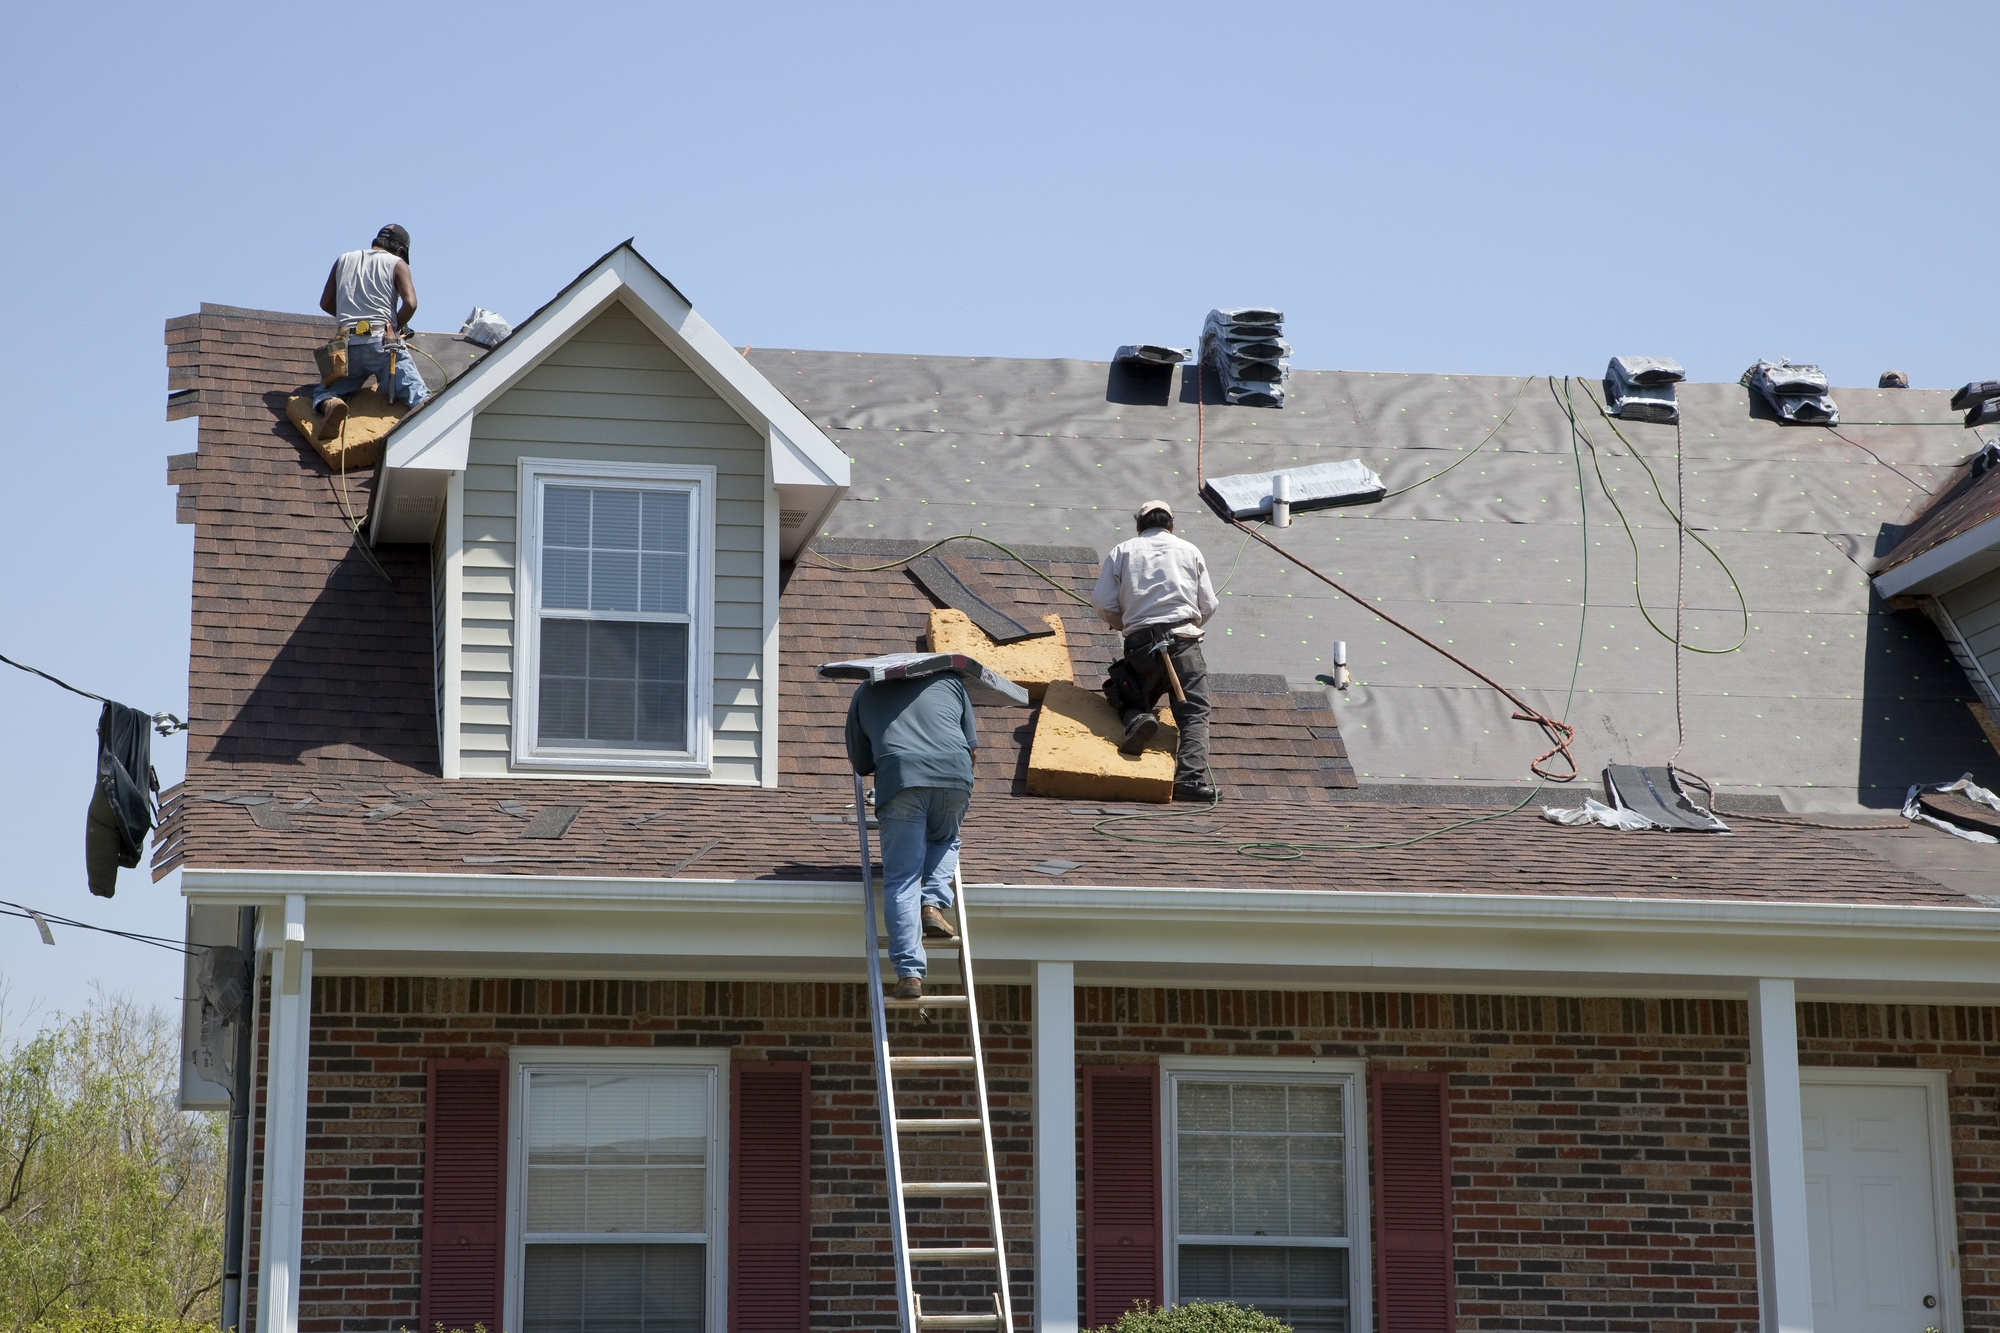 Roof repair company near me: Do you want to know how to choose the right one? Read on to learn how to make the right choice.